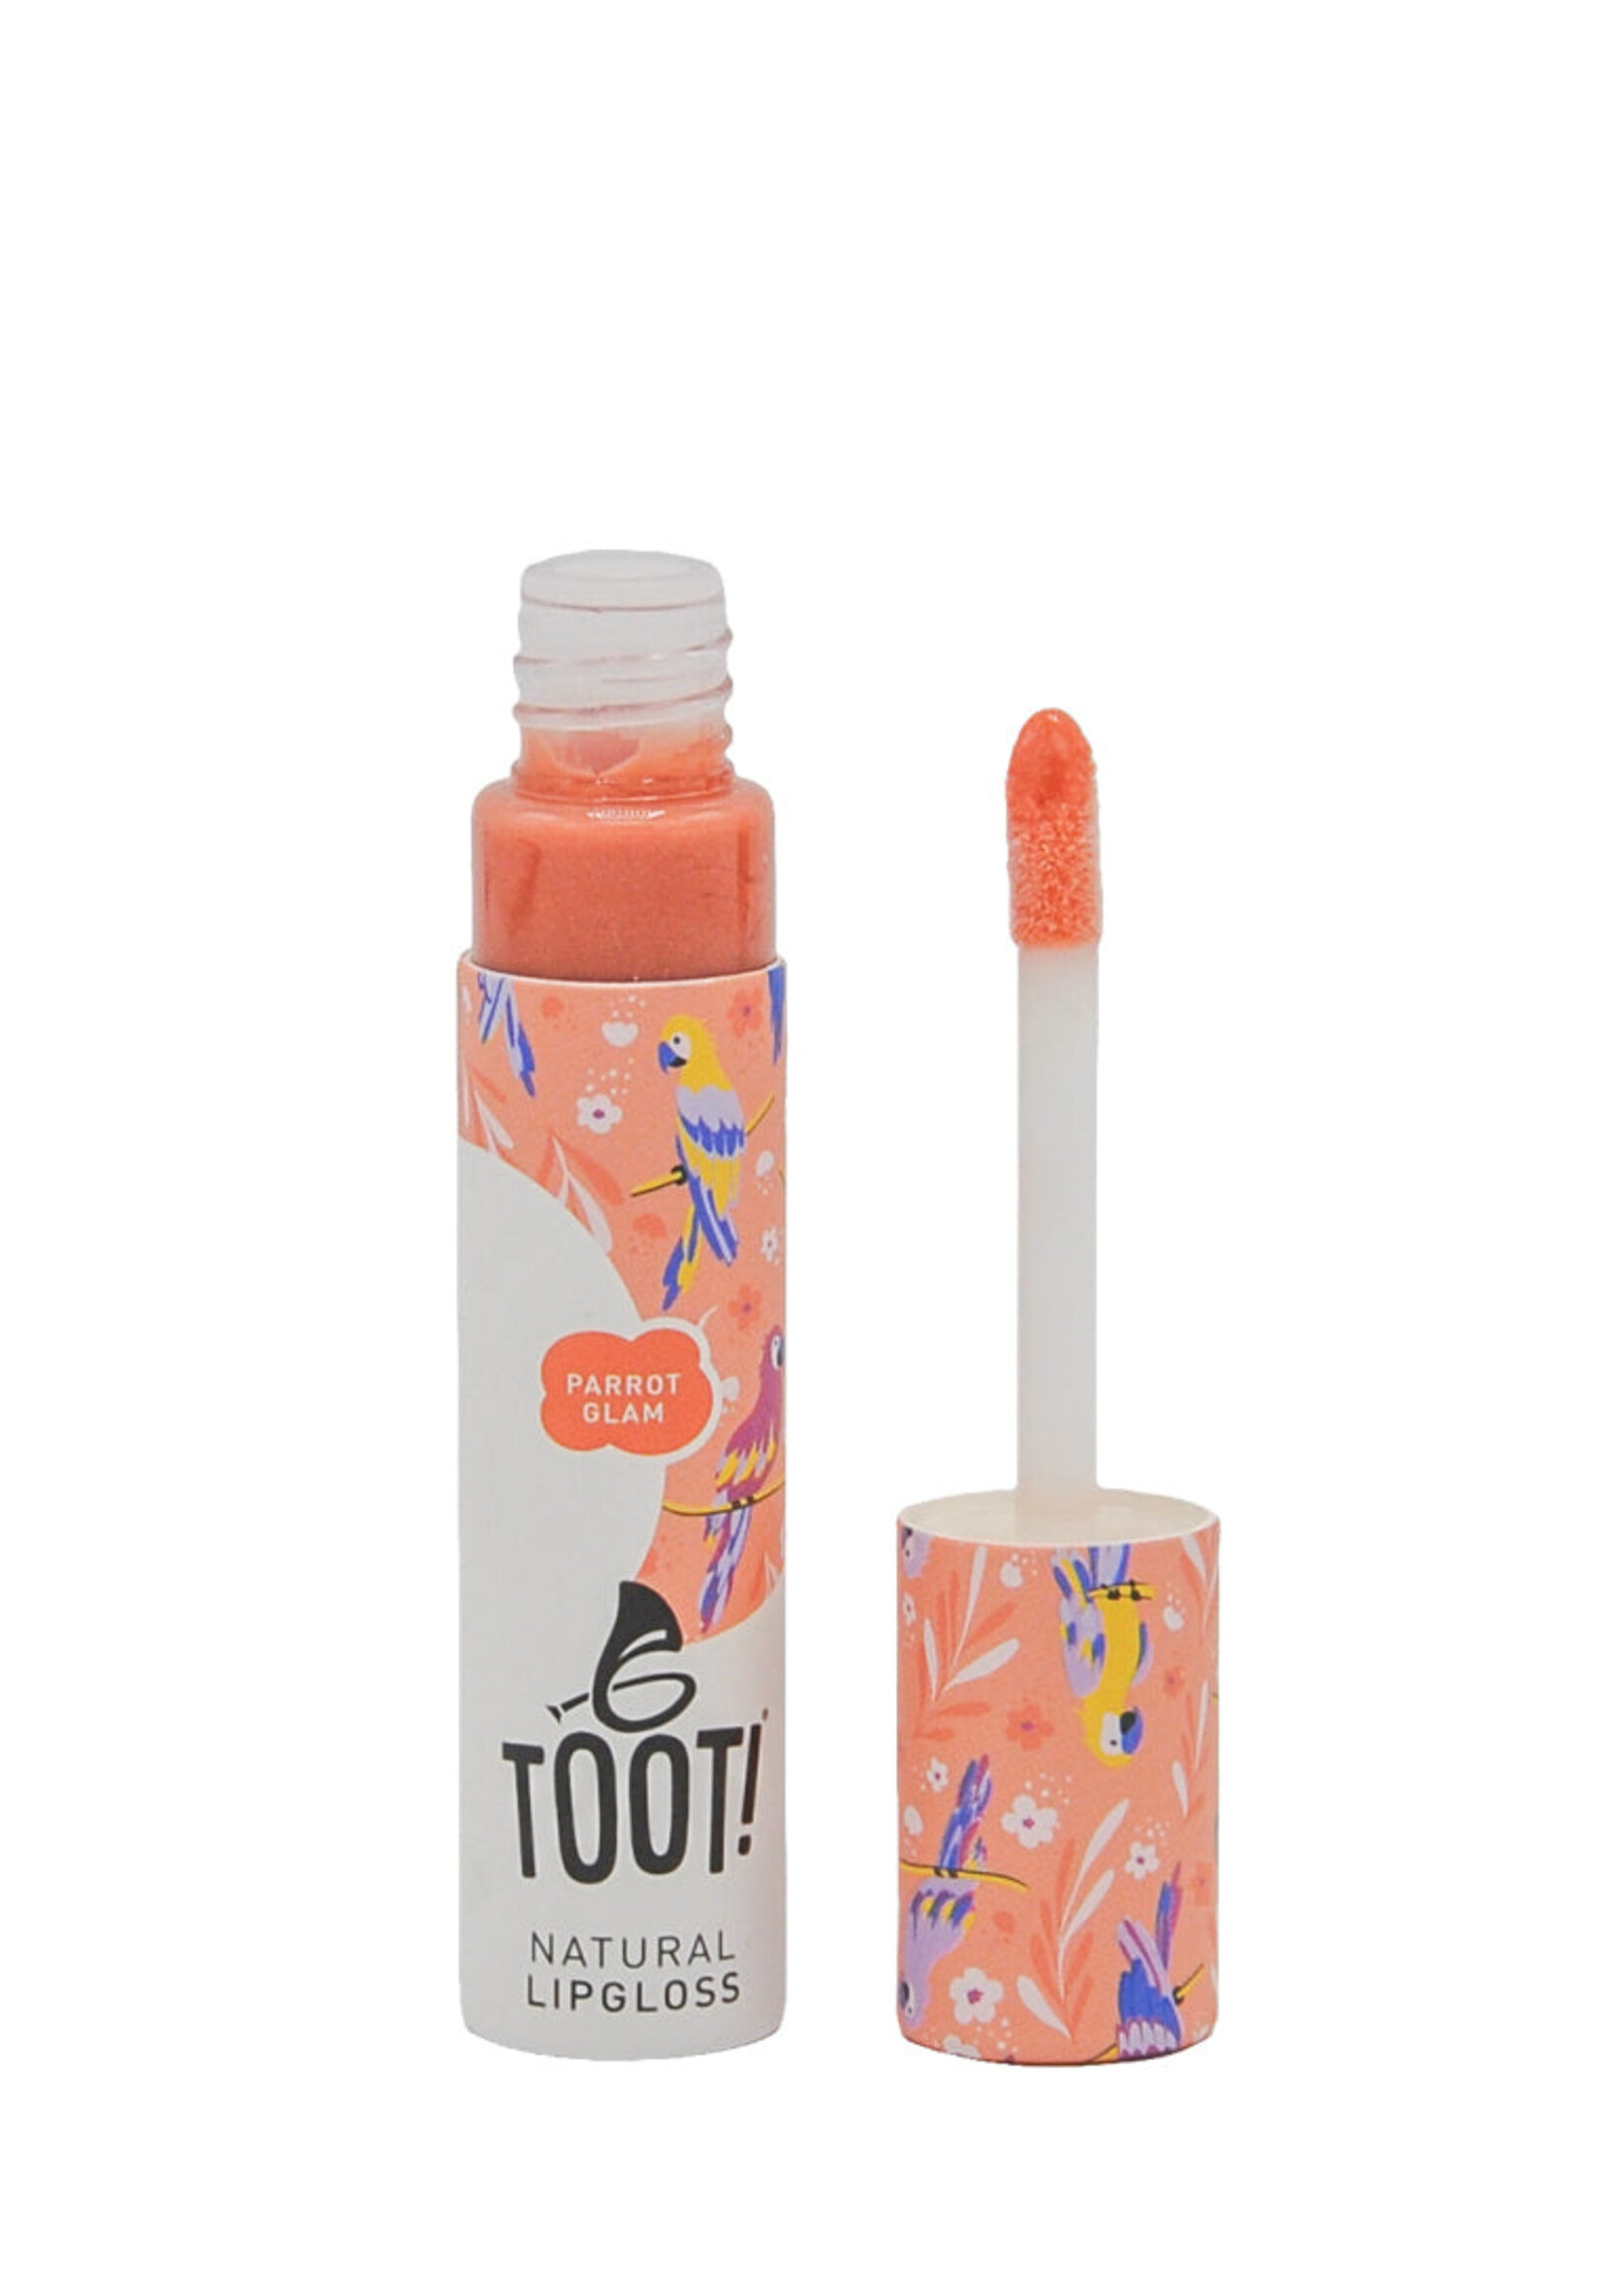 TOOT! TOOT! | Natural Lipgloss Parrot Glam